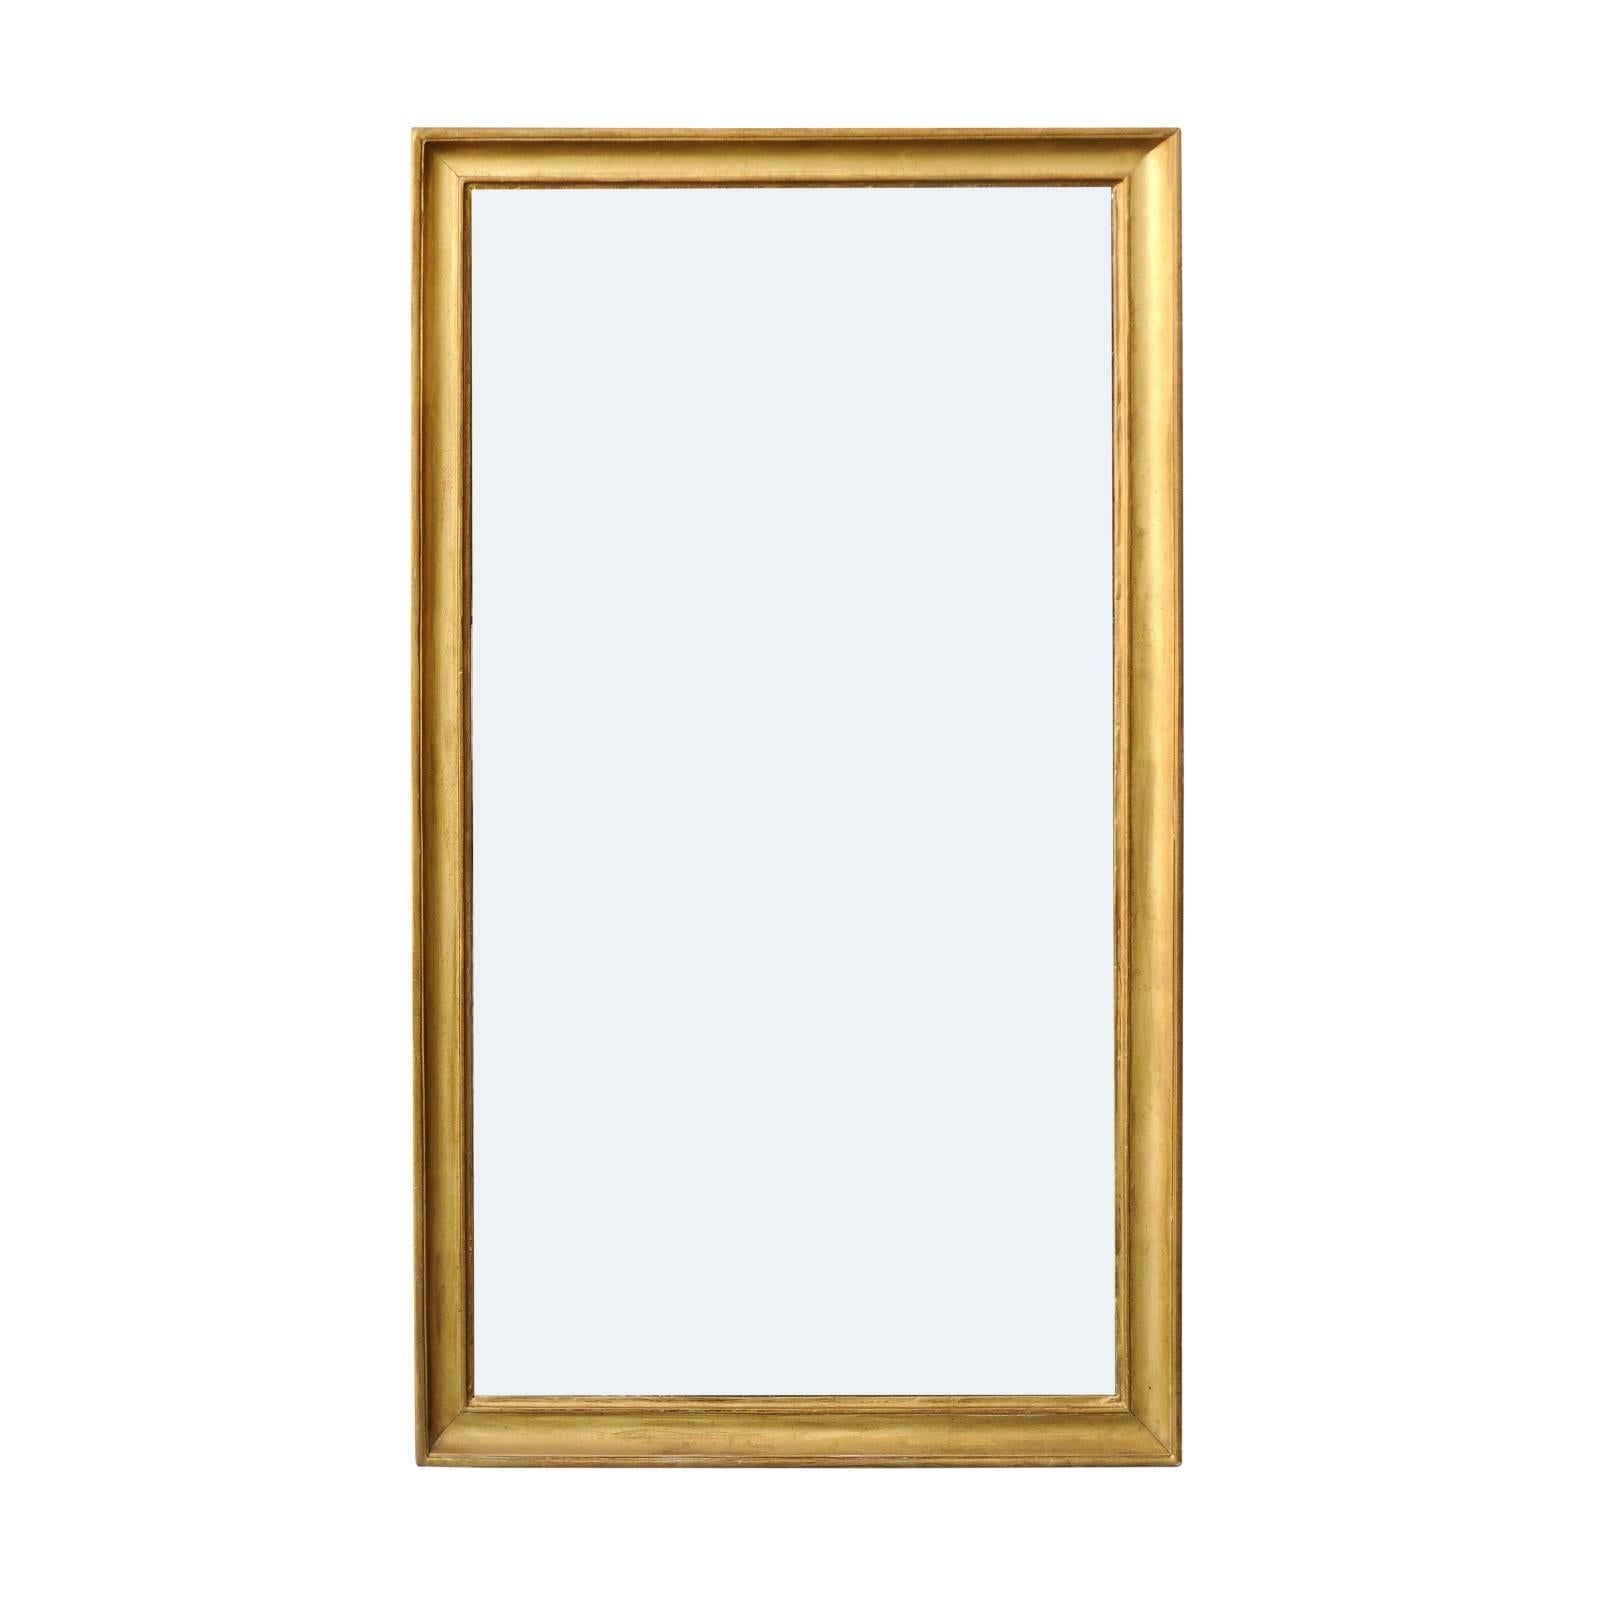 French Giltwood Rectangular Mirror with Split Glass from the Turn of the Century